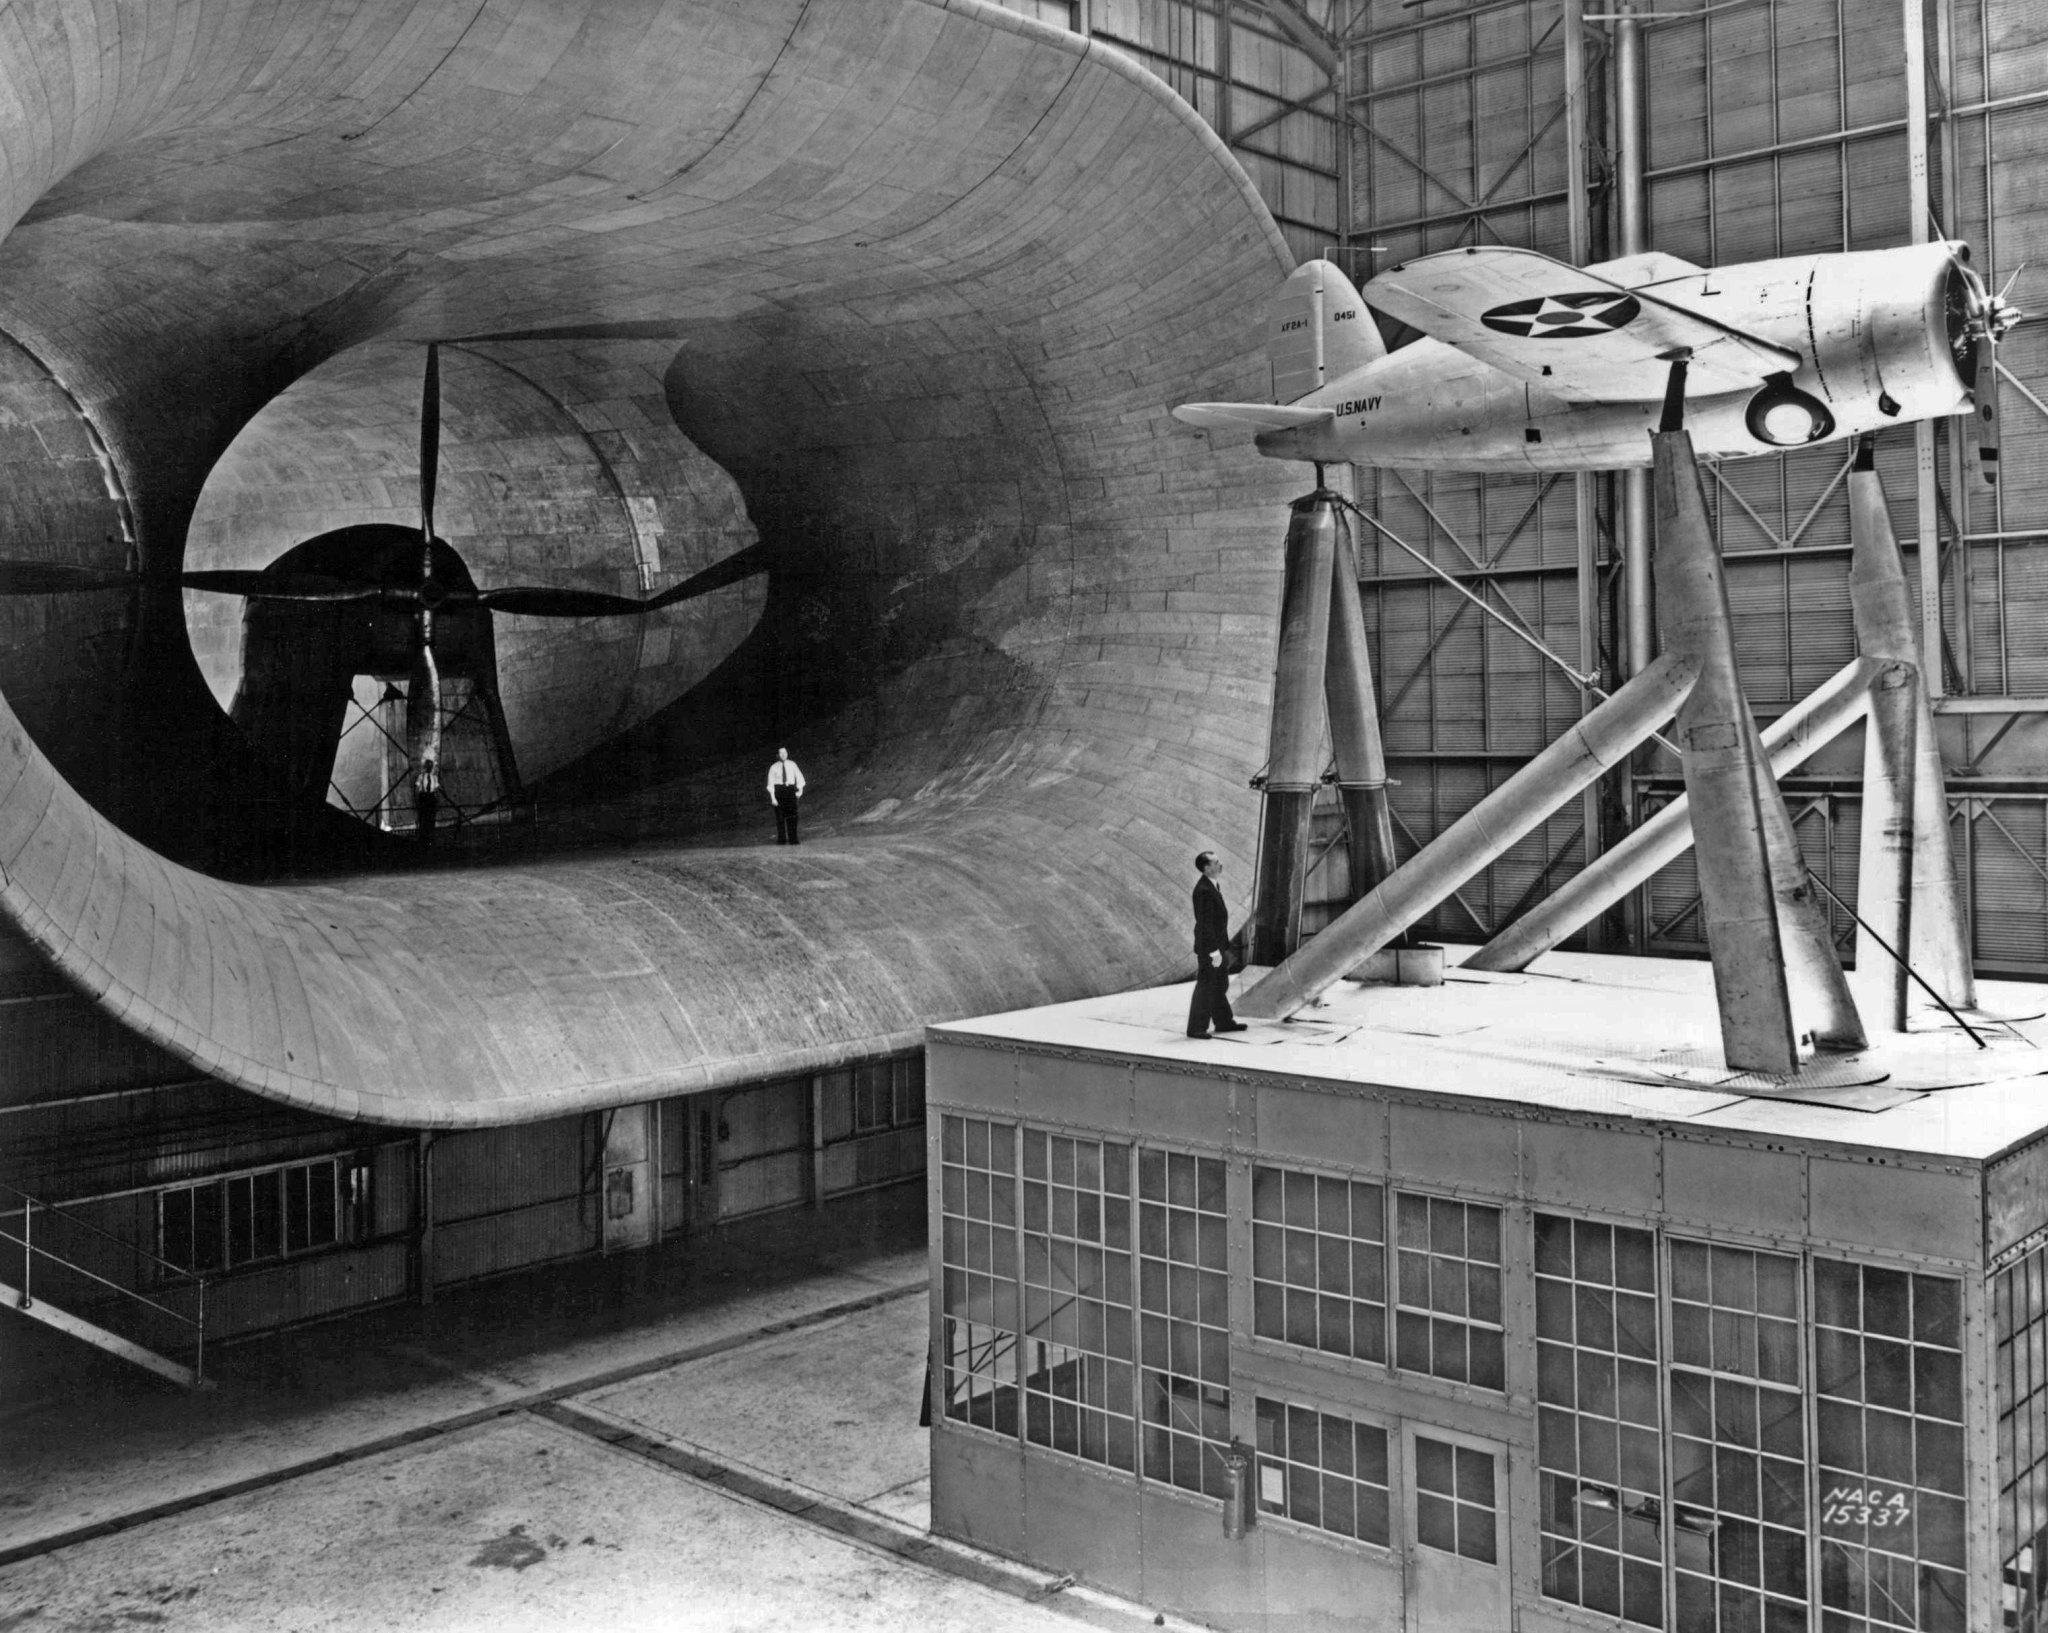 This is a photo of the Navy's Brewster XF2A-1 Buffalo mounted in the Full-Scale Tunnel for drag reduction studies.